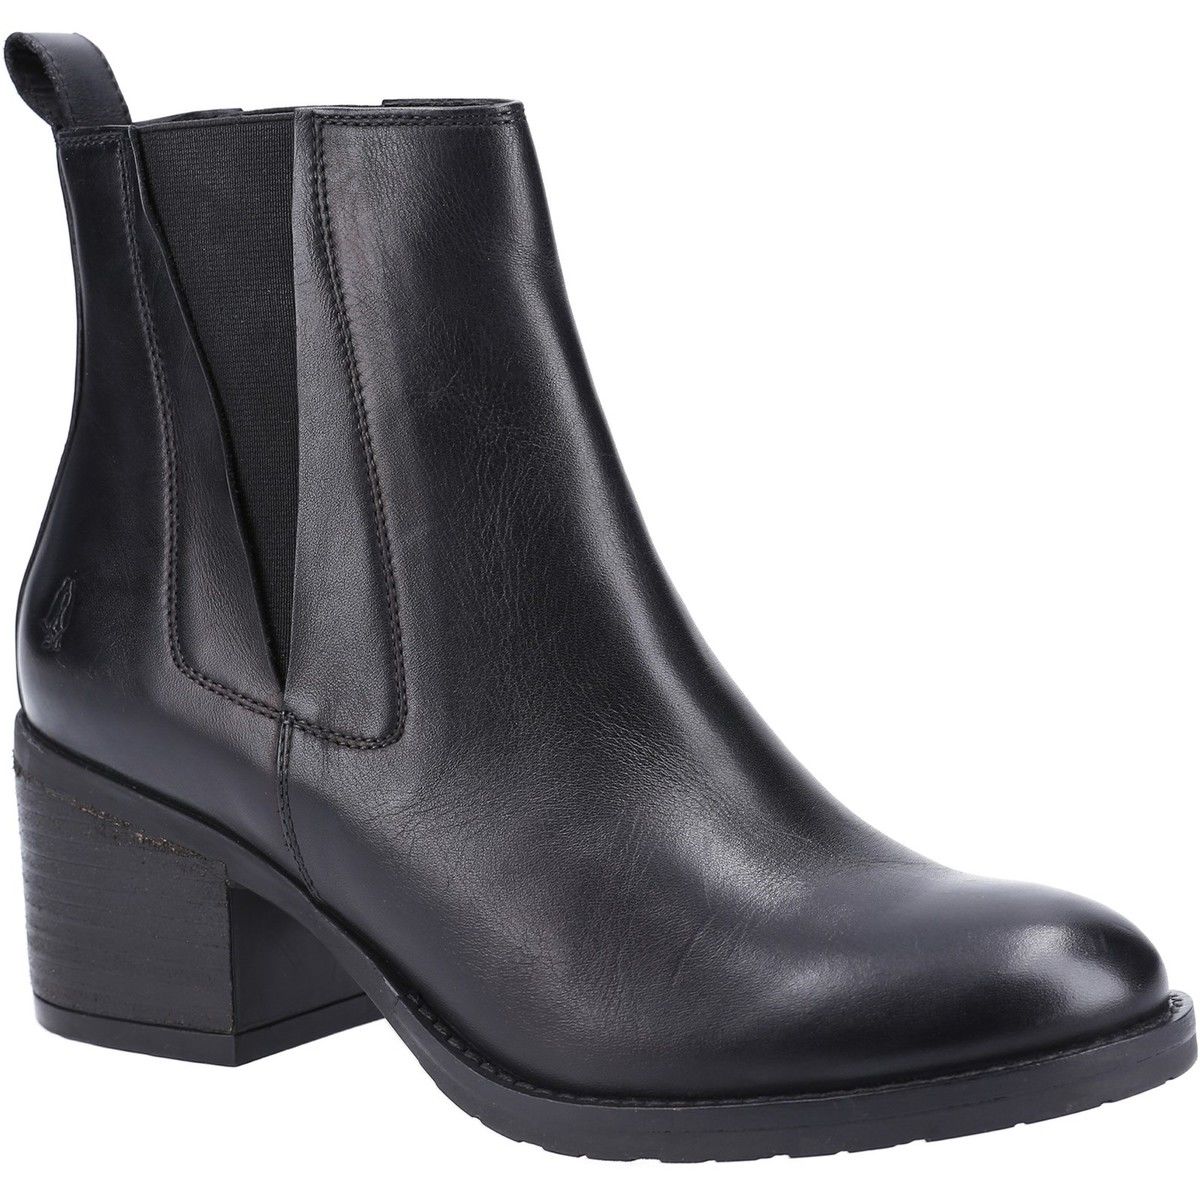 Hush Puppies Hermione Black Womens ankle boots HPW1000-239-1 in a Plain Leather in Size 8